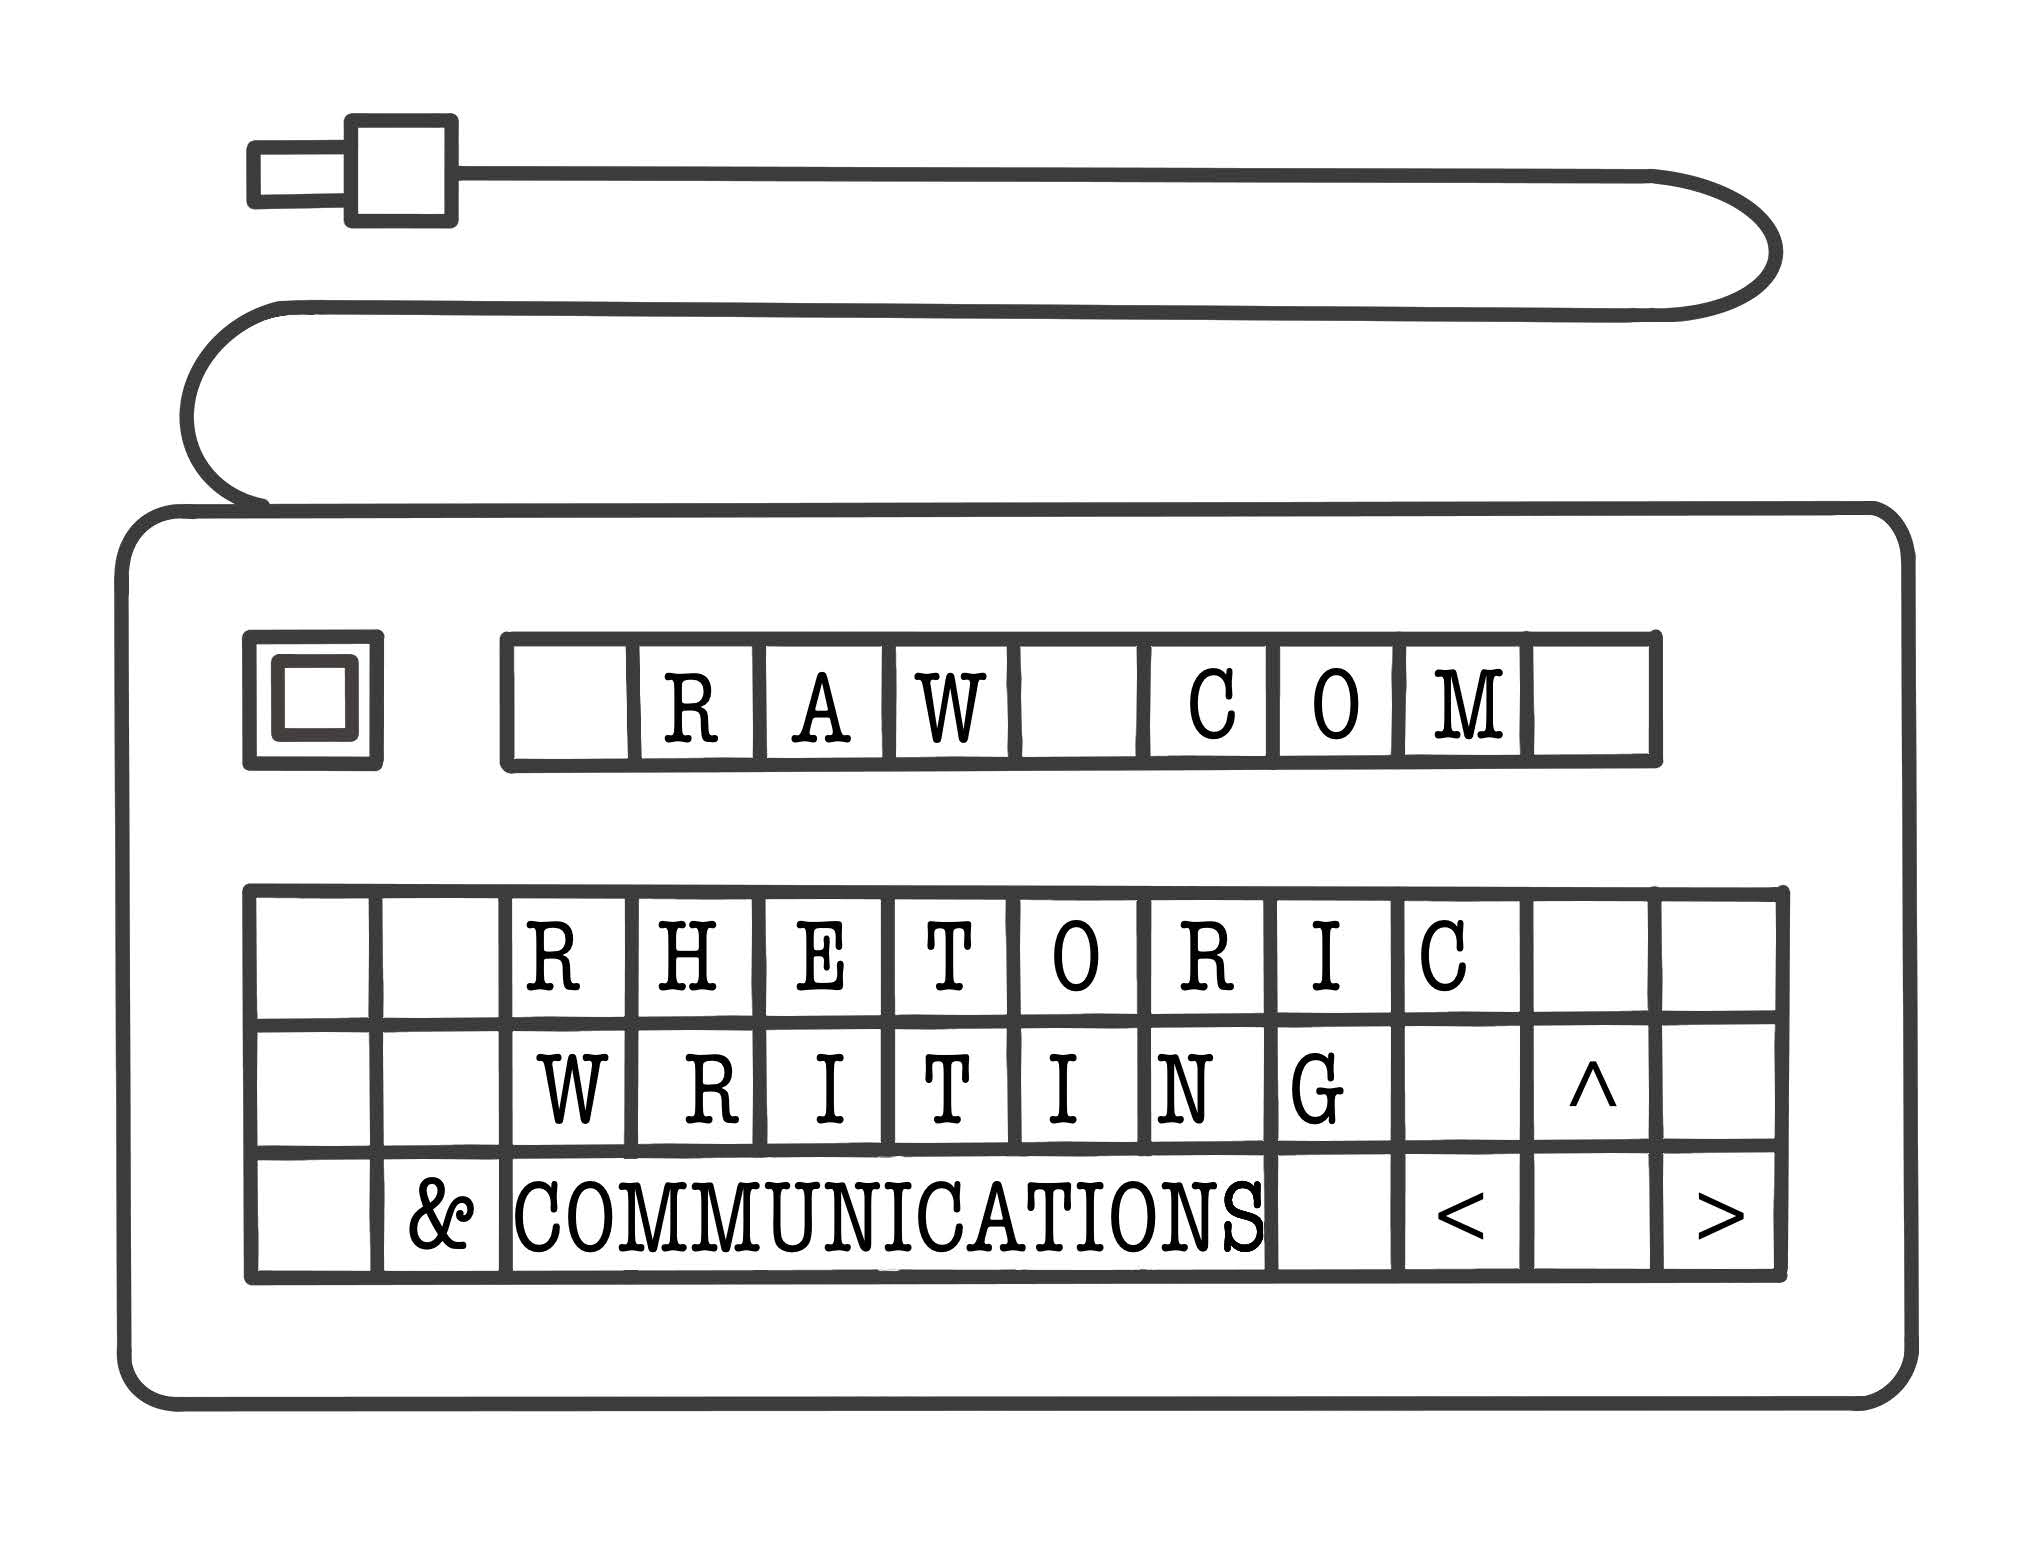 Keyboard with keys spelling "RAW COM" and "Rhetoric, Writing and Communications"